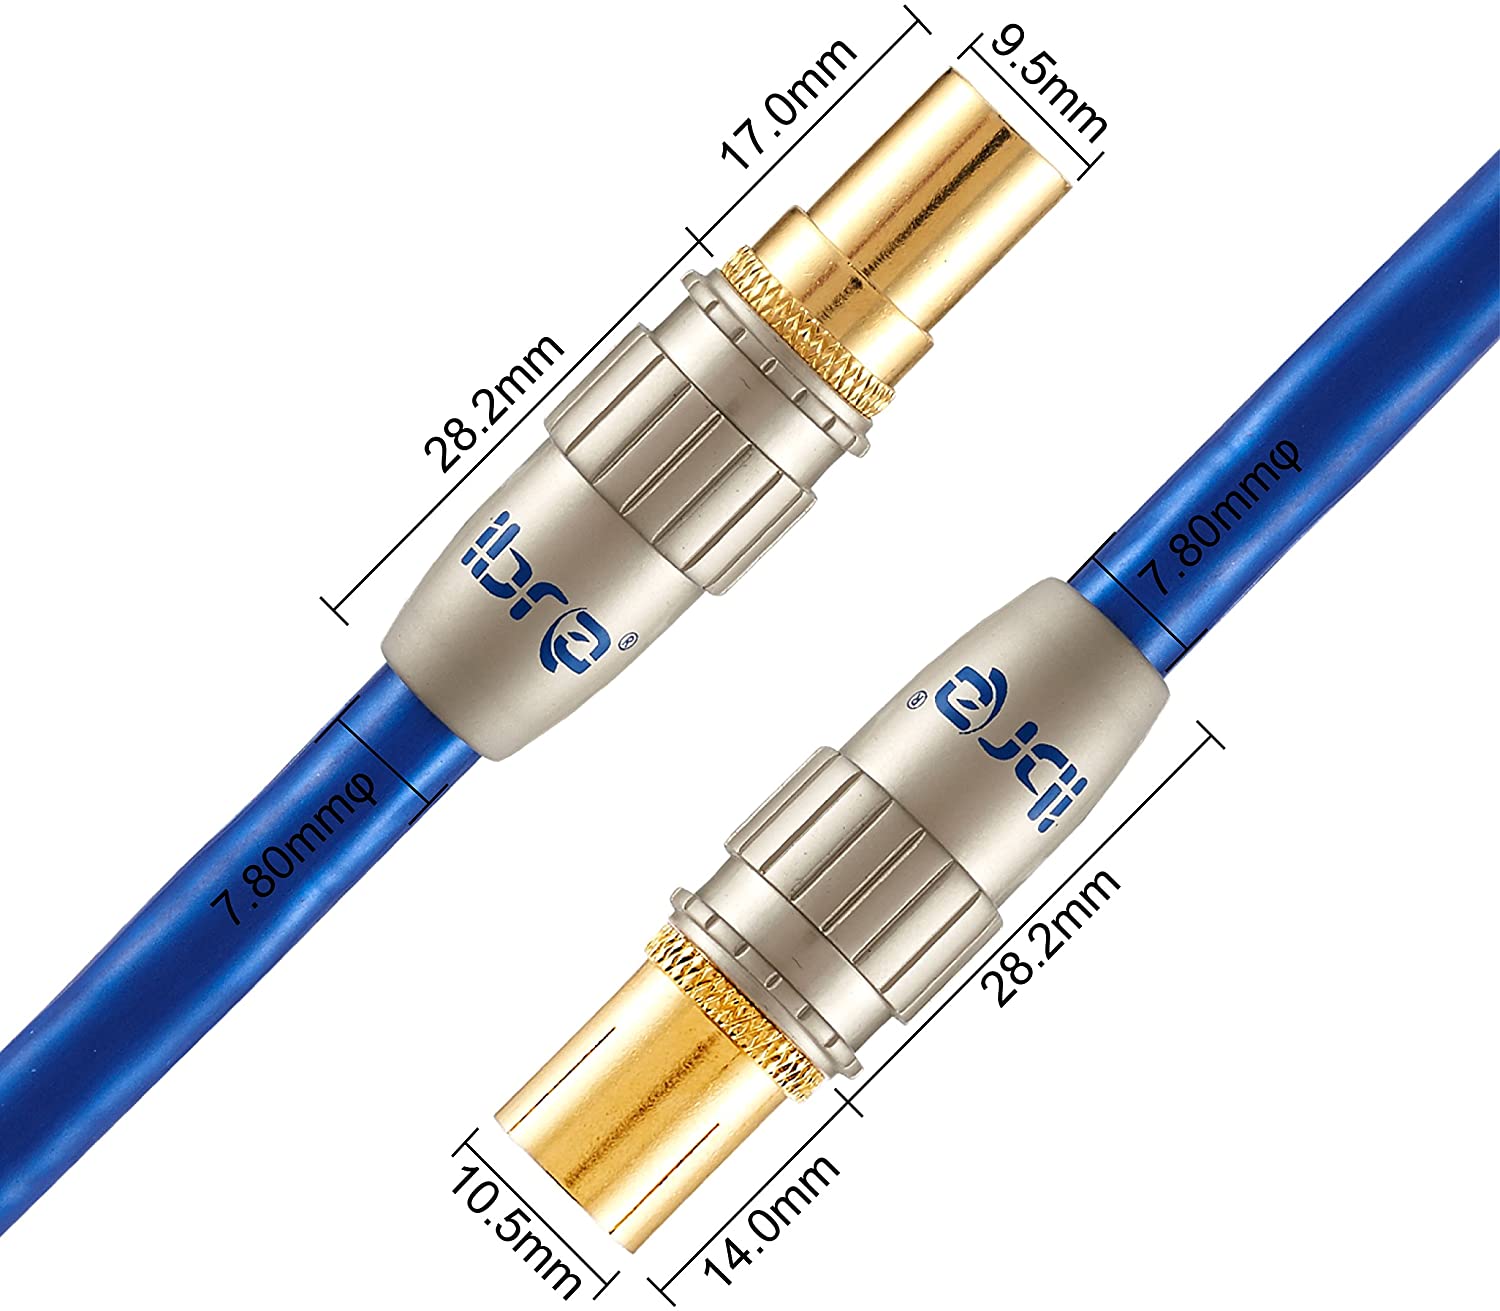 Pure OFC RF RG6 TV Aerial Coax Lead Gold Male to Female Extension Premium Cable - 12.5m IBRA Blue Gold Series